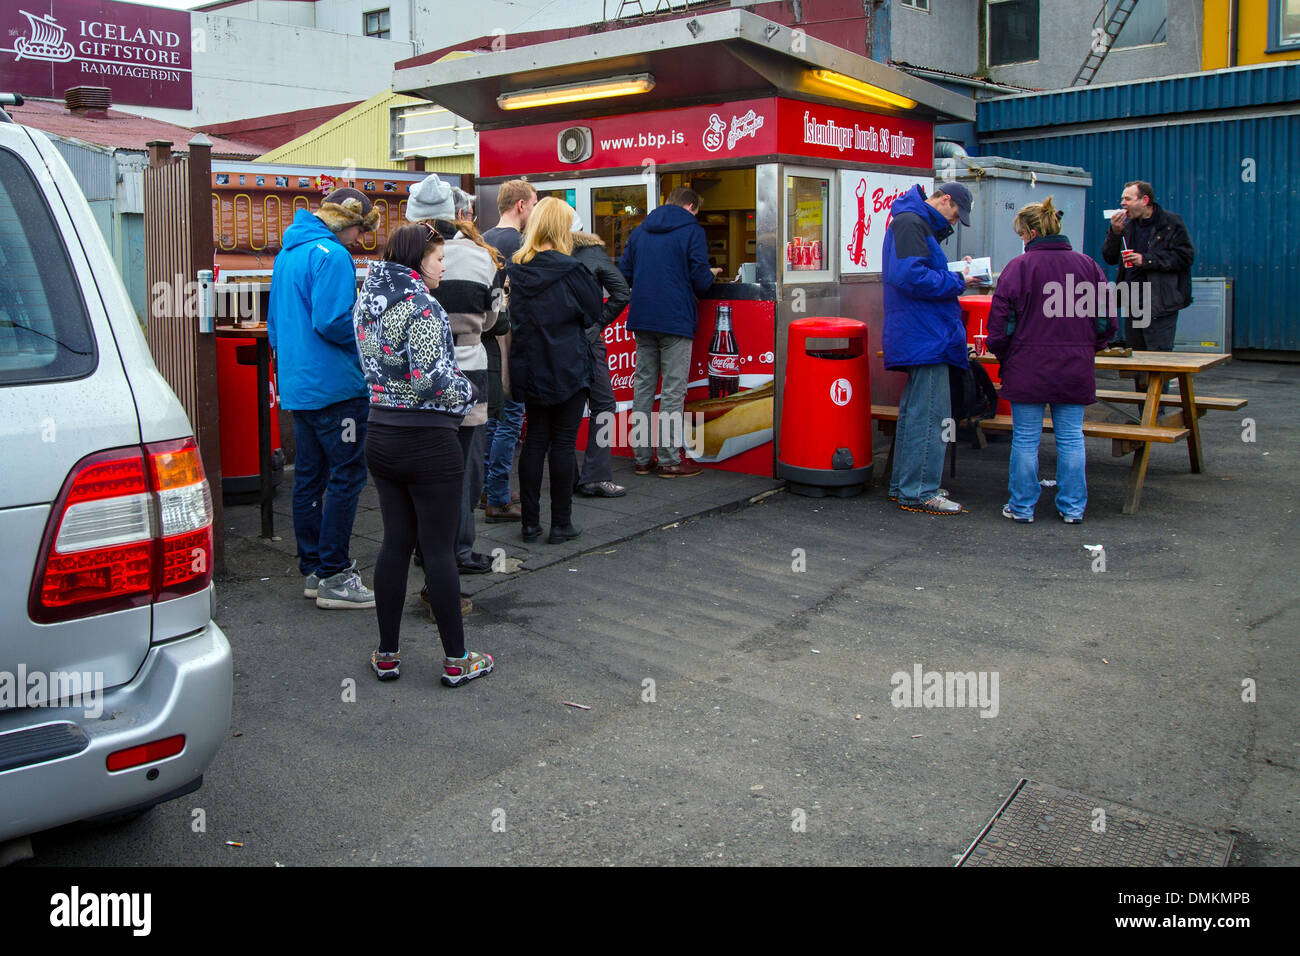 SMALL SNACK BAR IN THE STREET, CITY OF REYKJAVIK, CAPITAL OF ICELAND, EUROPE Stock Photo